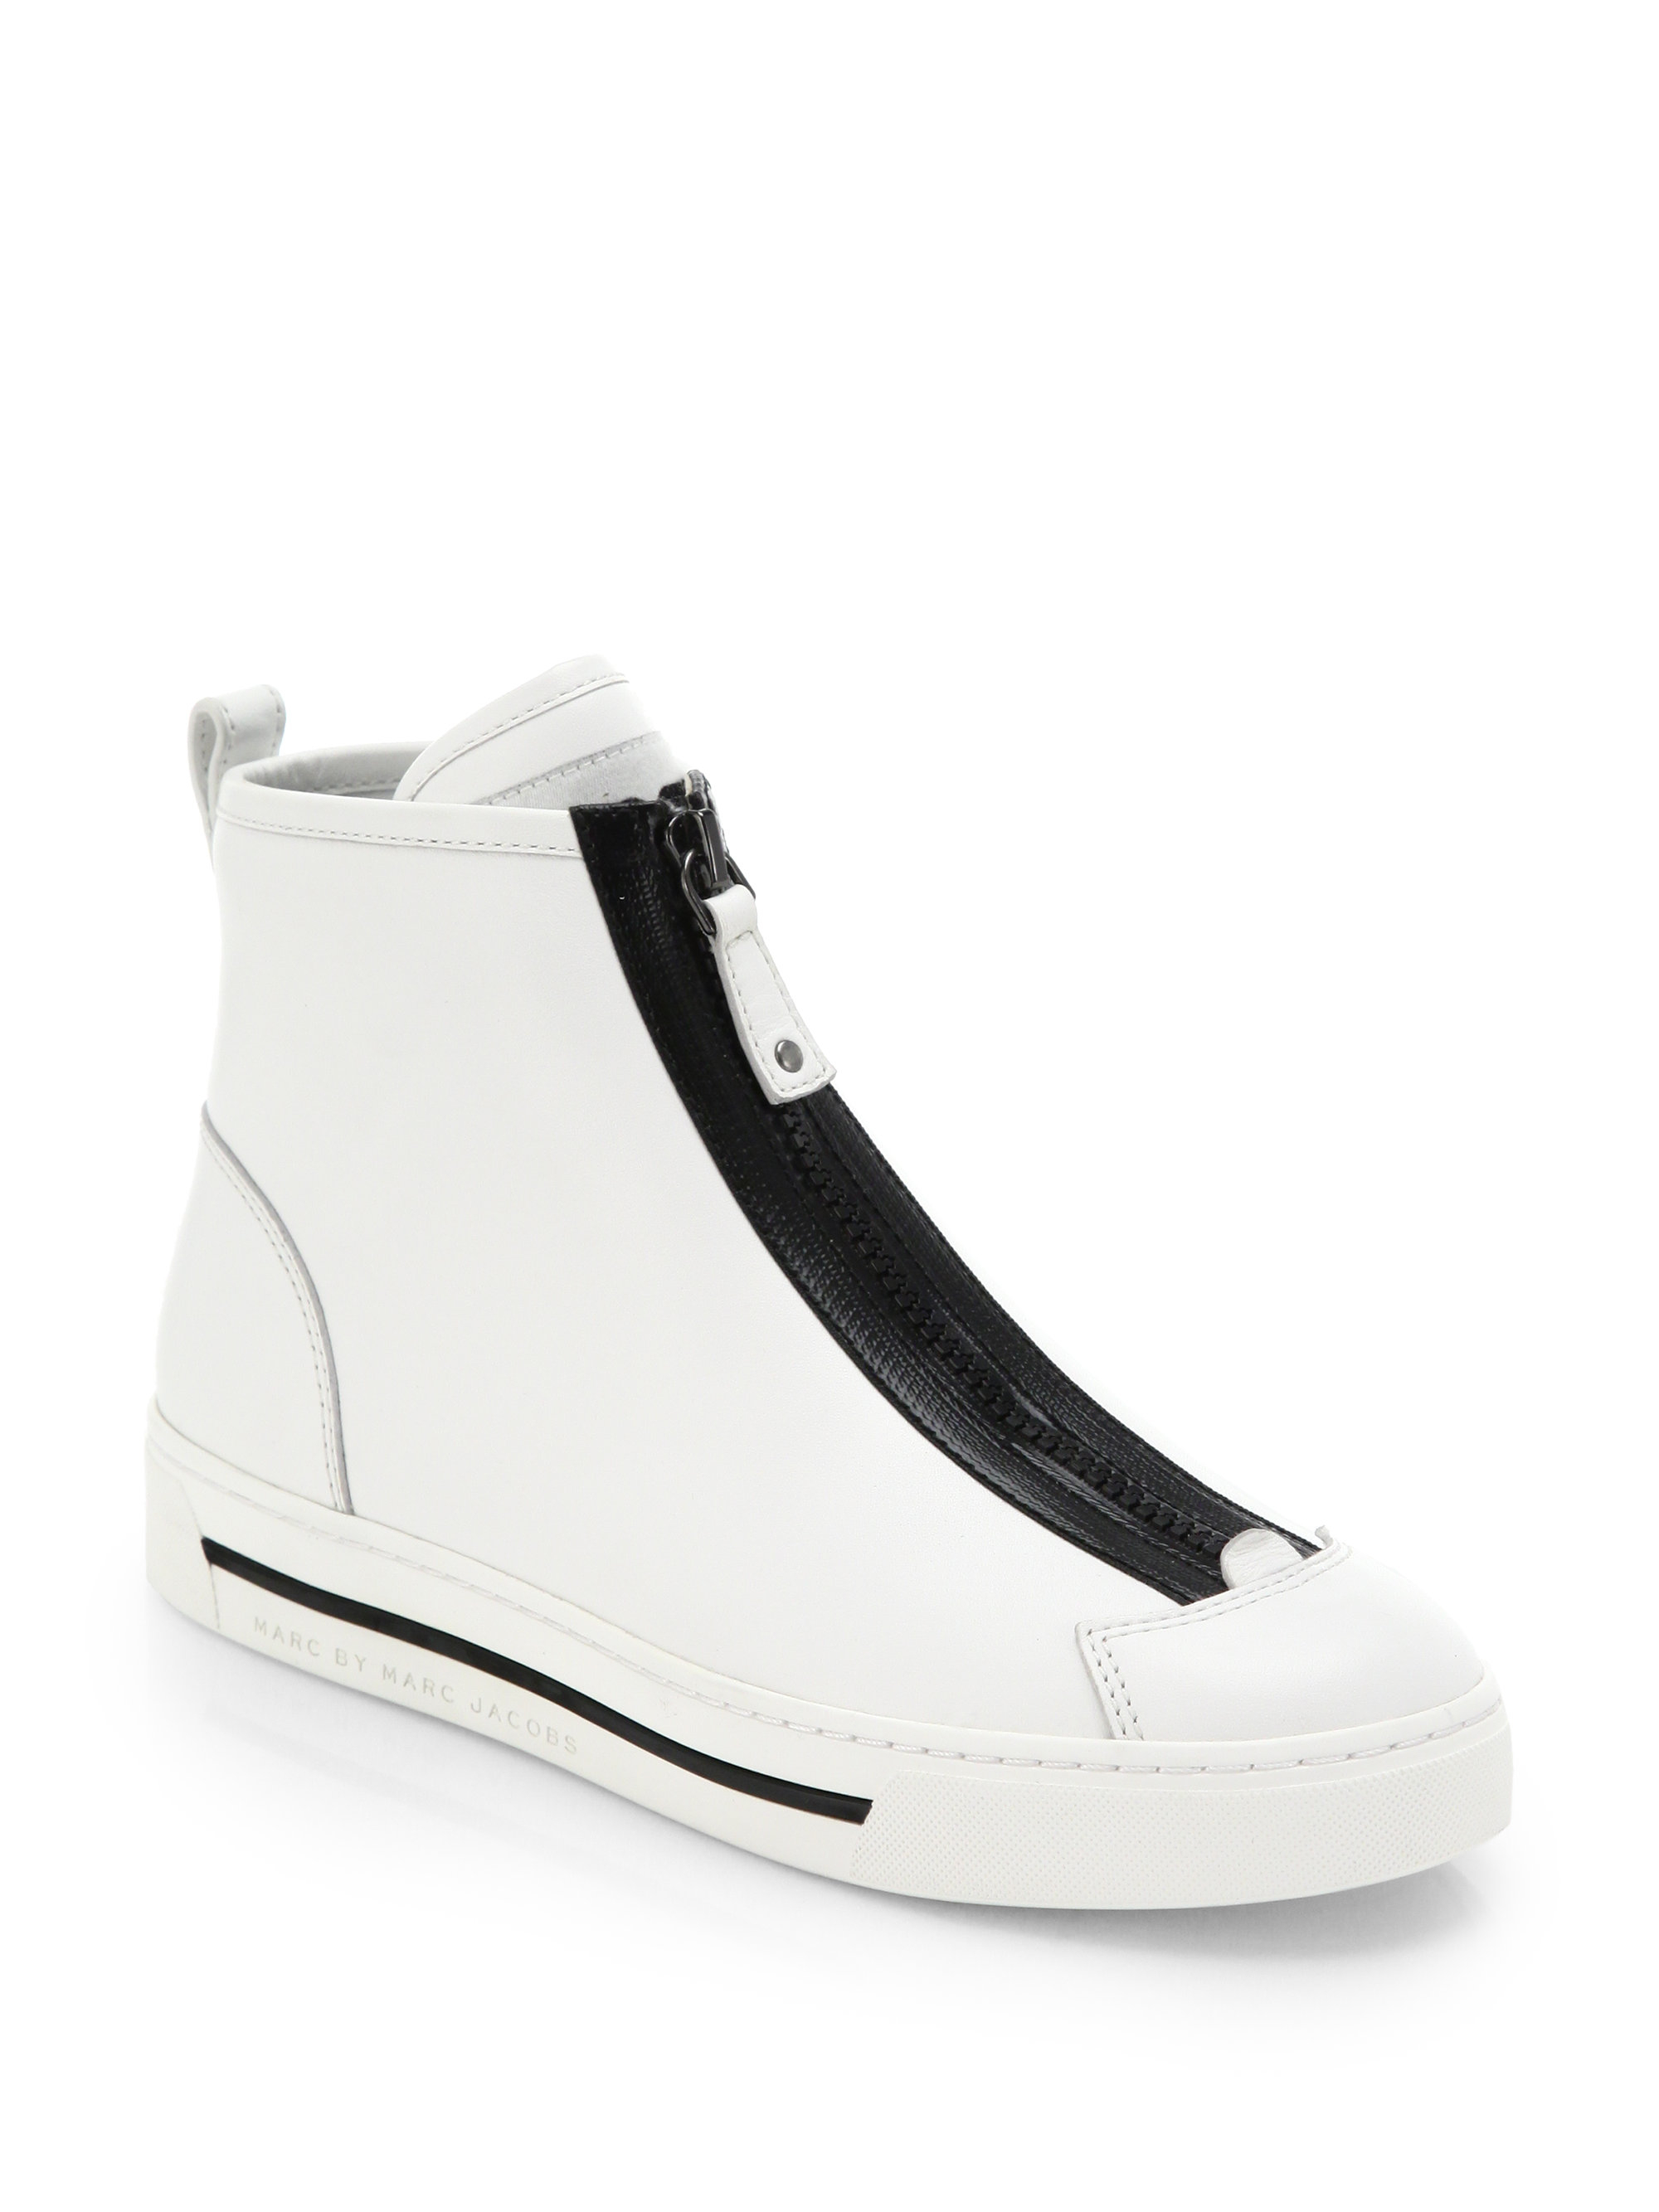 Marc By Marc Jacobs Zip-Front Leather High-Top Sneakers in White | Lyst